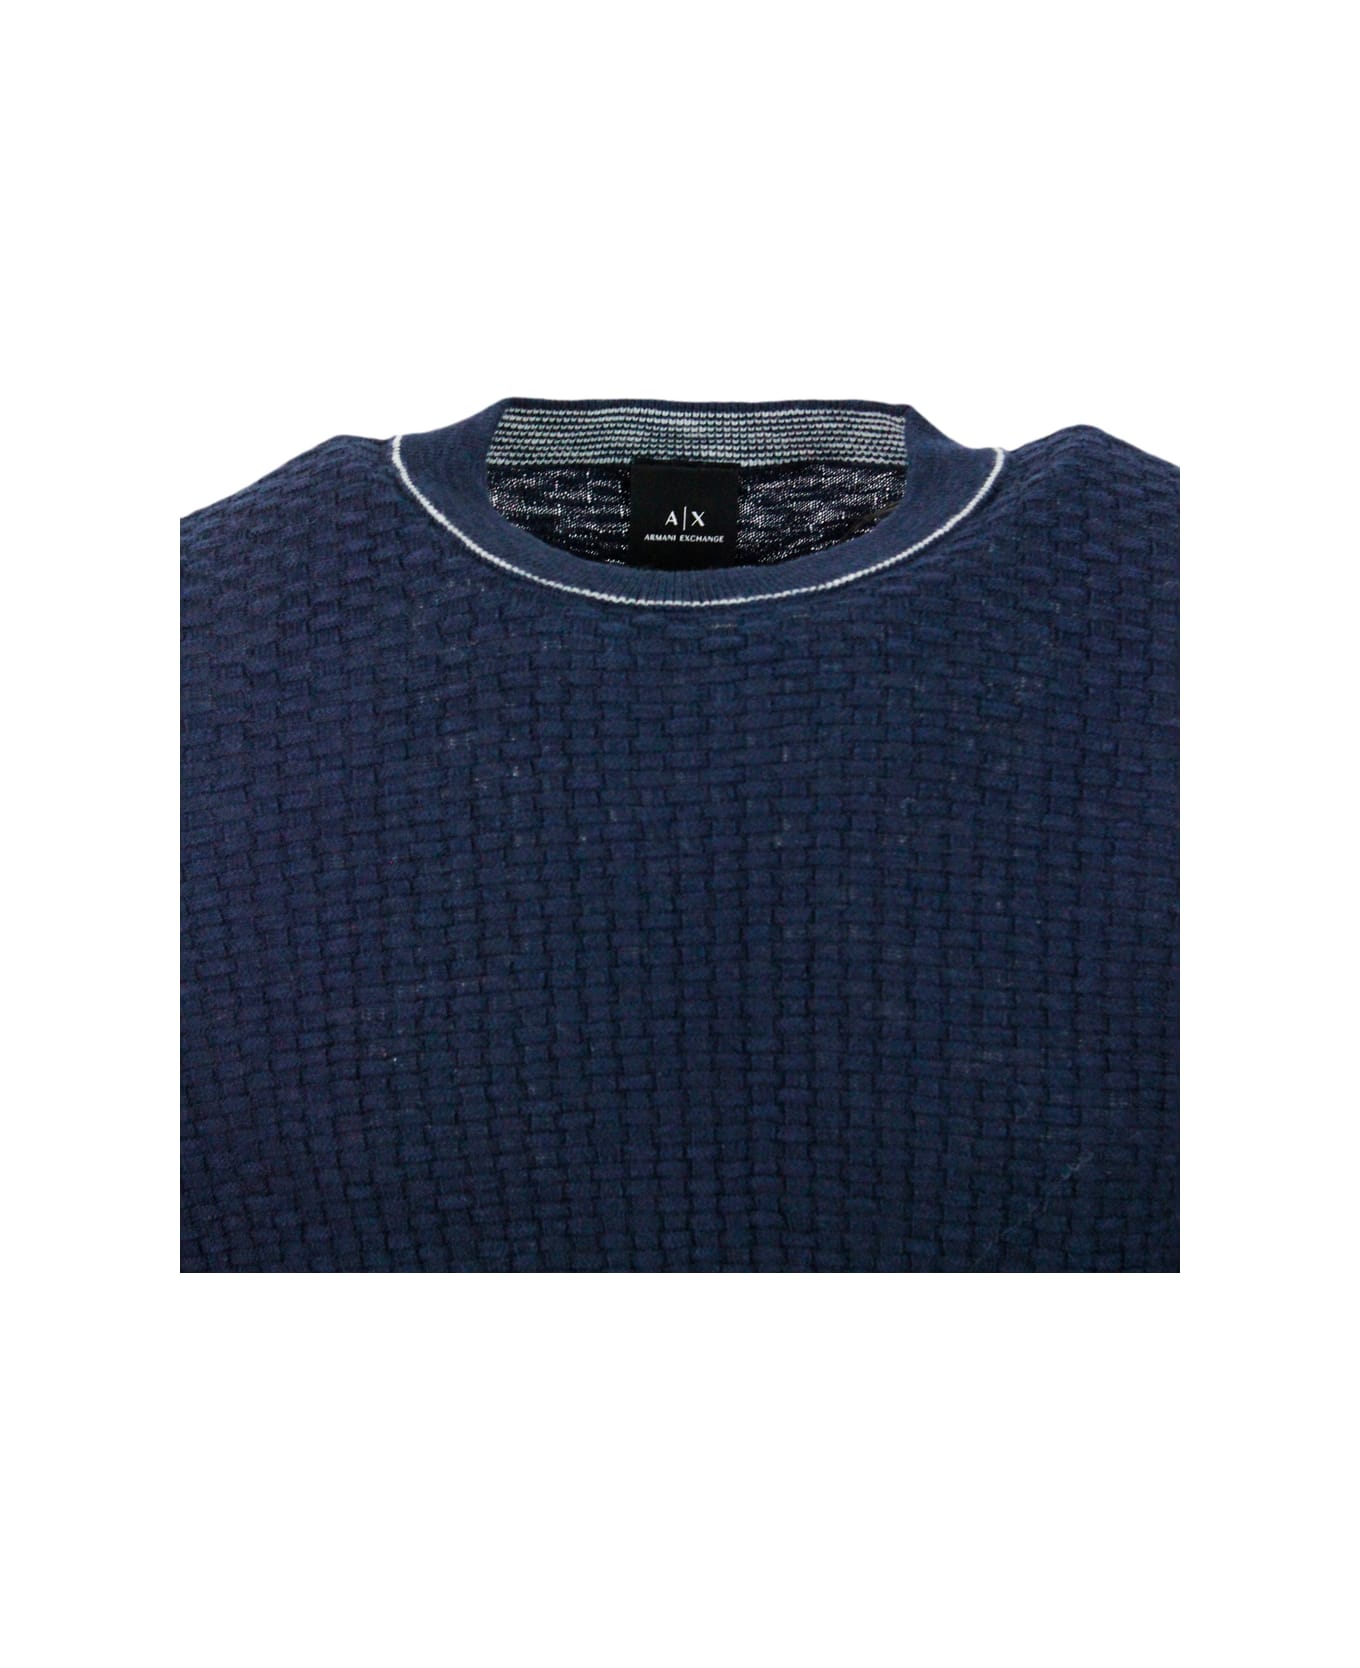 Armani Collezioni Crew-neck And Long-sleeved Sweater In Cotton And Linen With Honeycomb Workmanship. - Blue